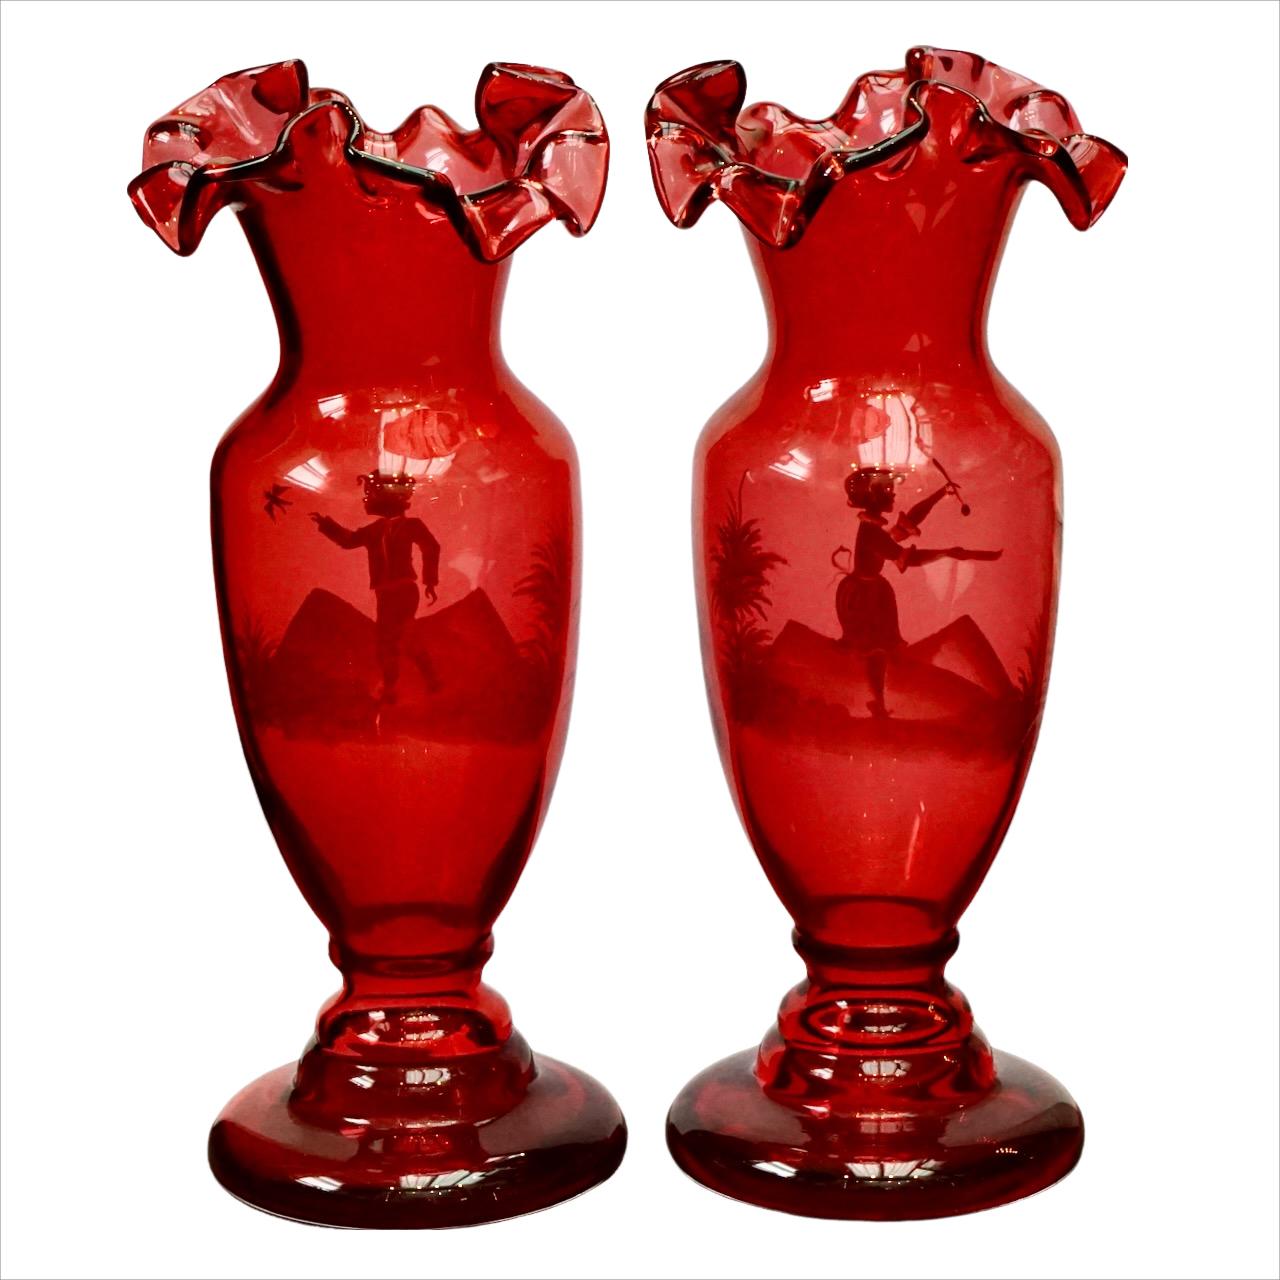 Beautiful Mary Gregory pair of hand painted cranberry glass fluted vases. The vases are hand made. Measuring height approximately 28 cm / 11 inches, and the base is diameter 10.6 cm / 4.17 inches. The vases are in very good condition.

These